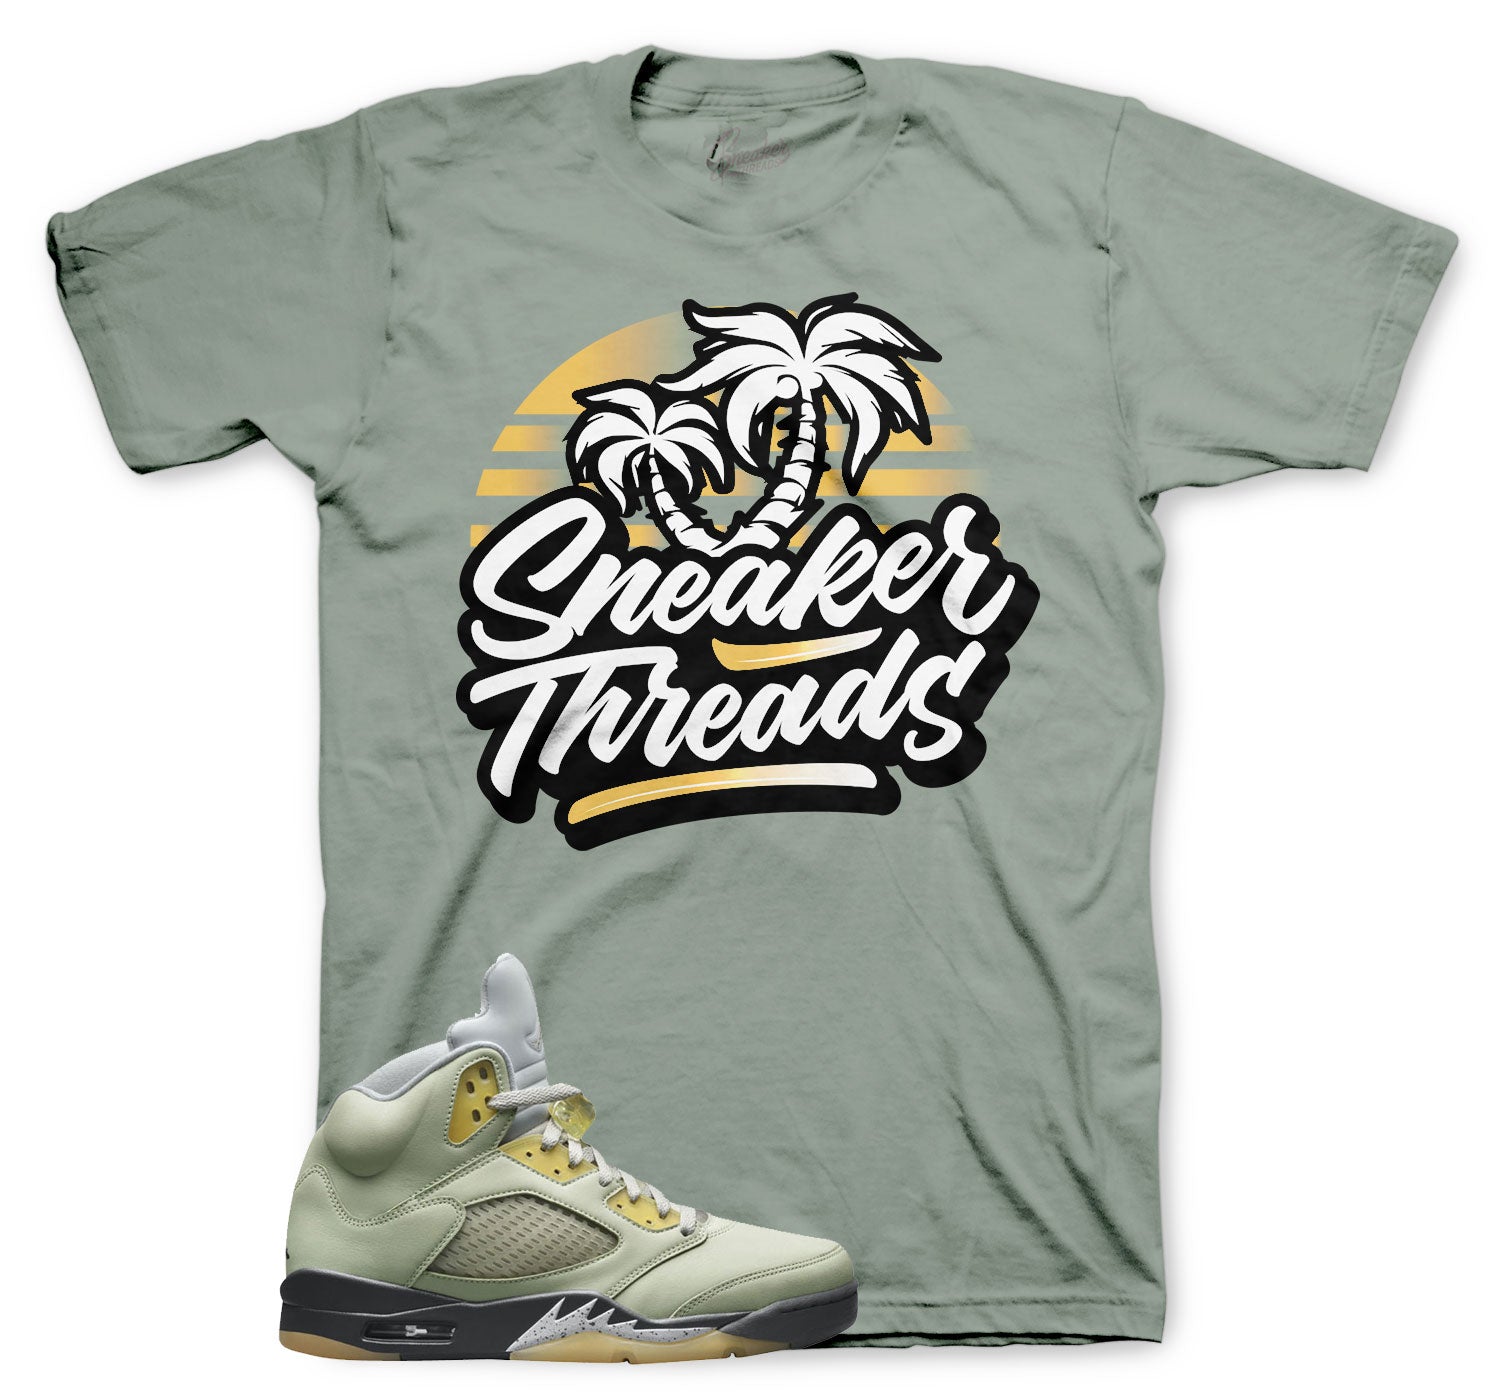 graphic tees to go with jordans